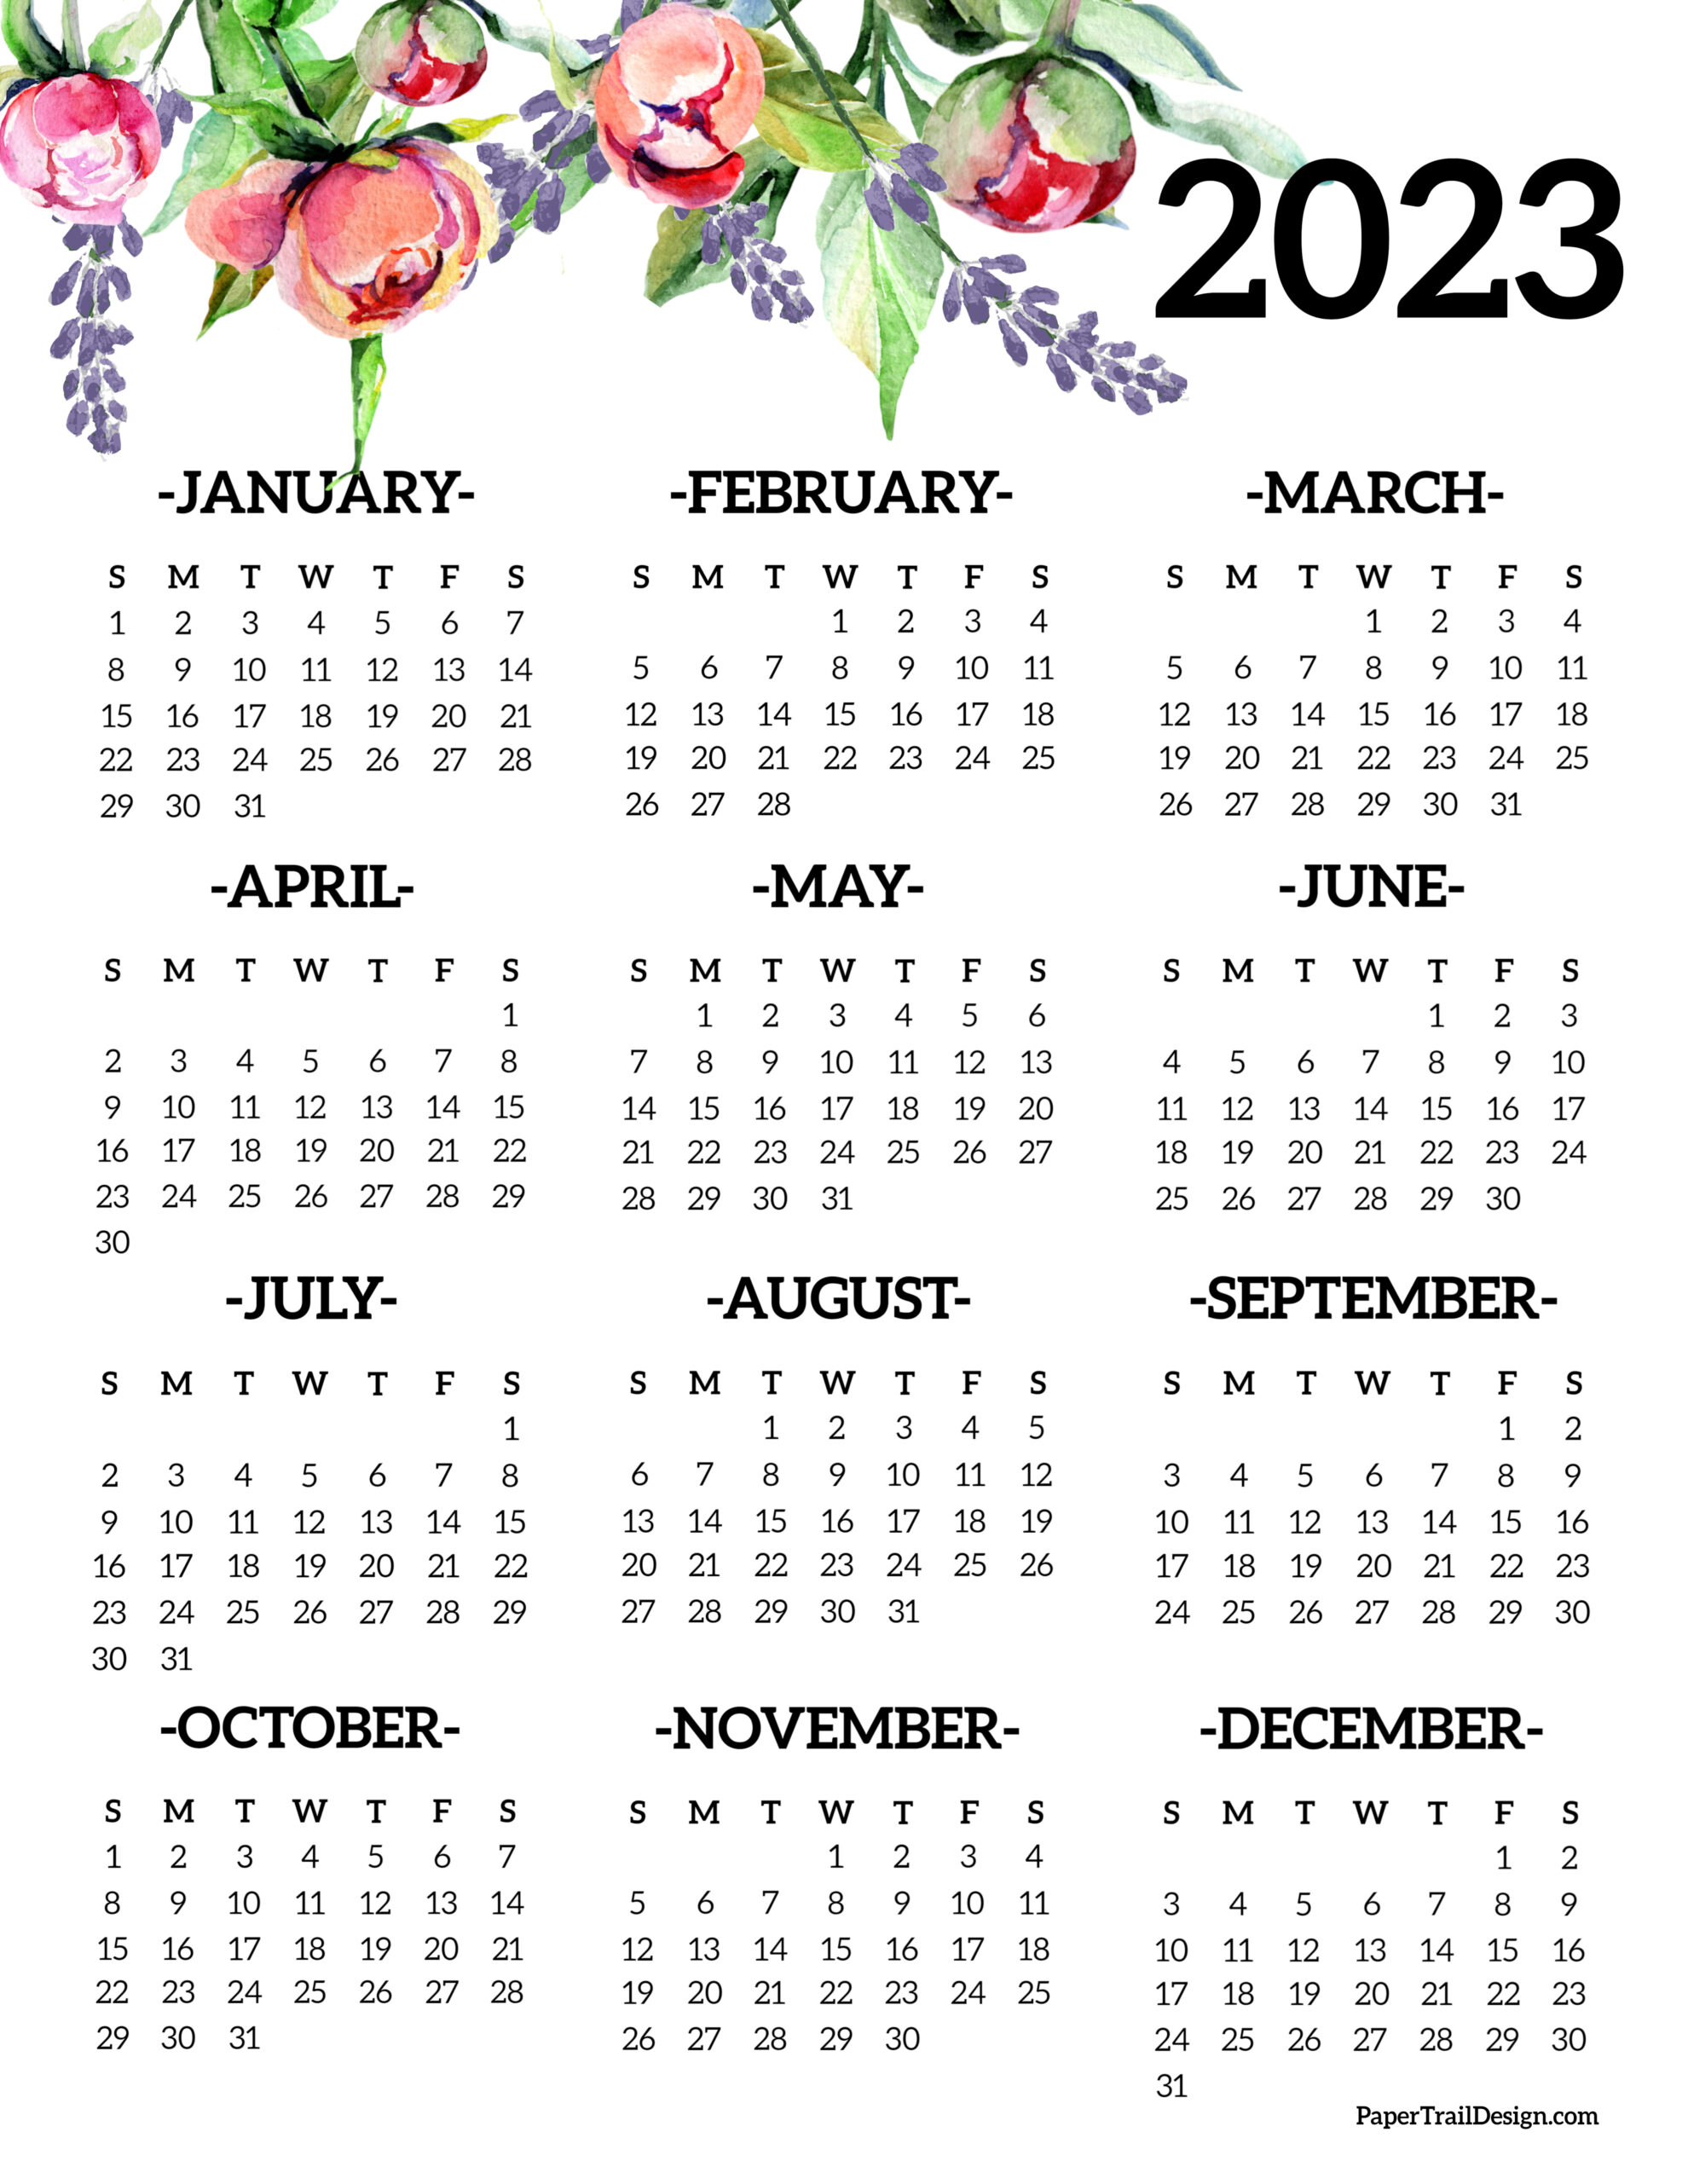 Calendar 2023 Printable One Page - Paper Trail Design